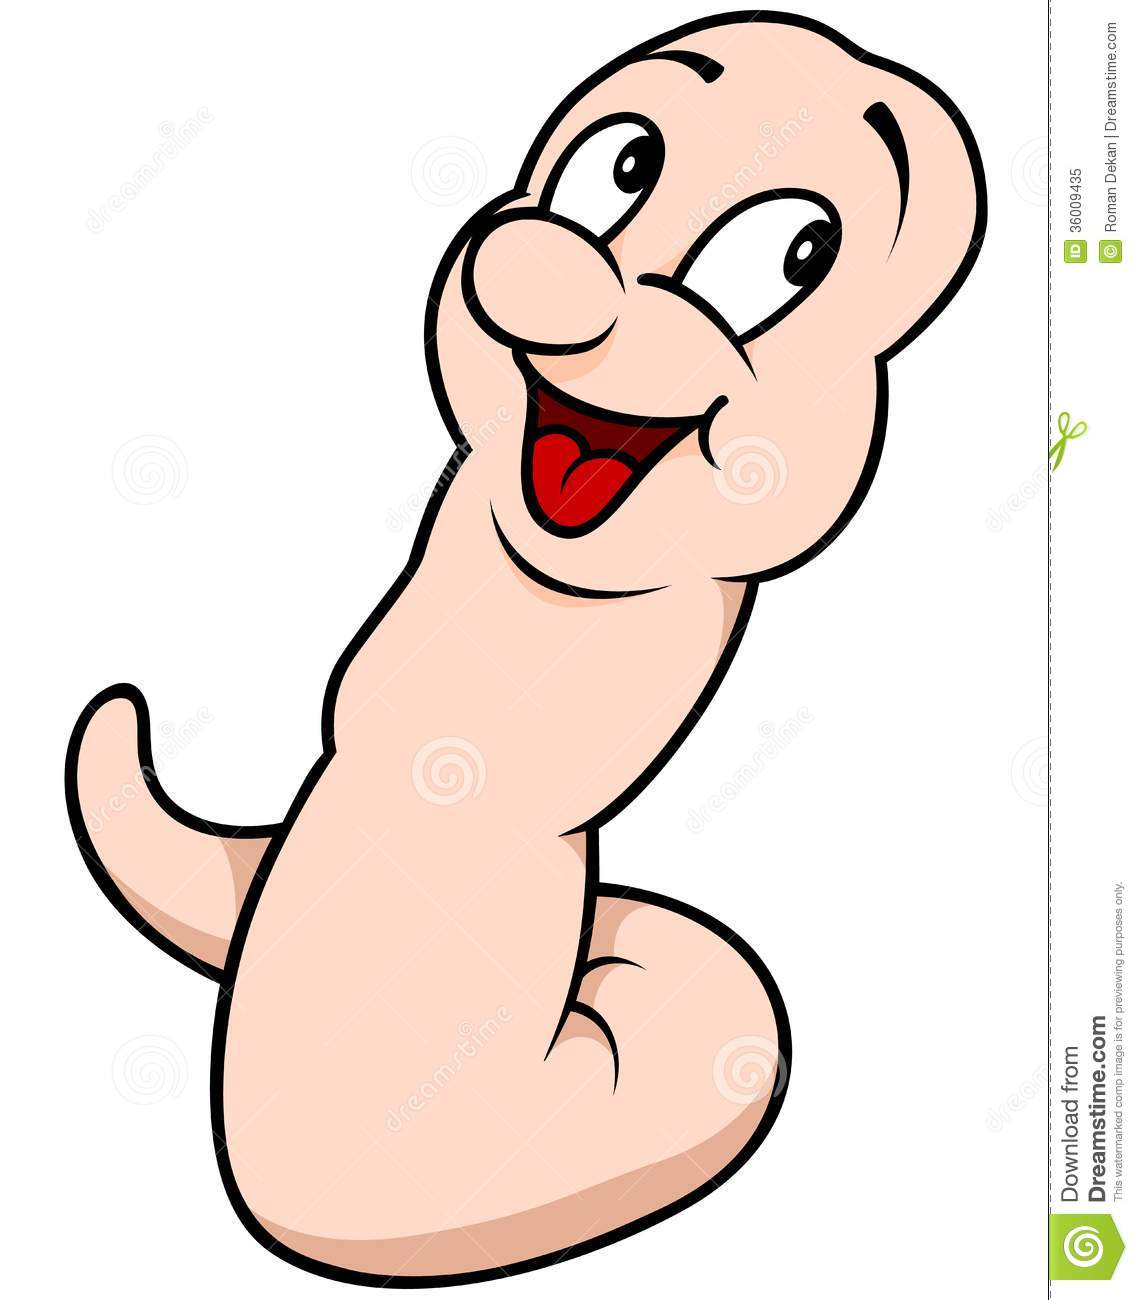 Happy Little Worm Royalty Free Stock Photo   Image  36009435